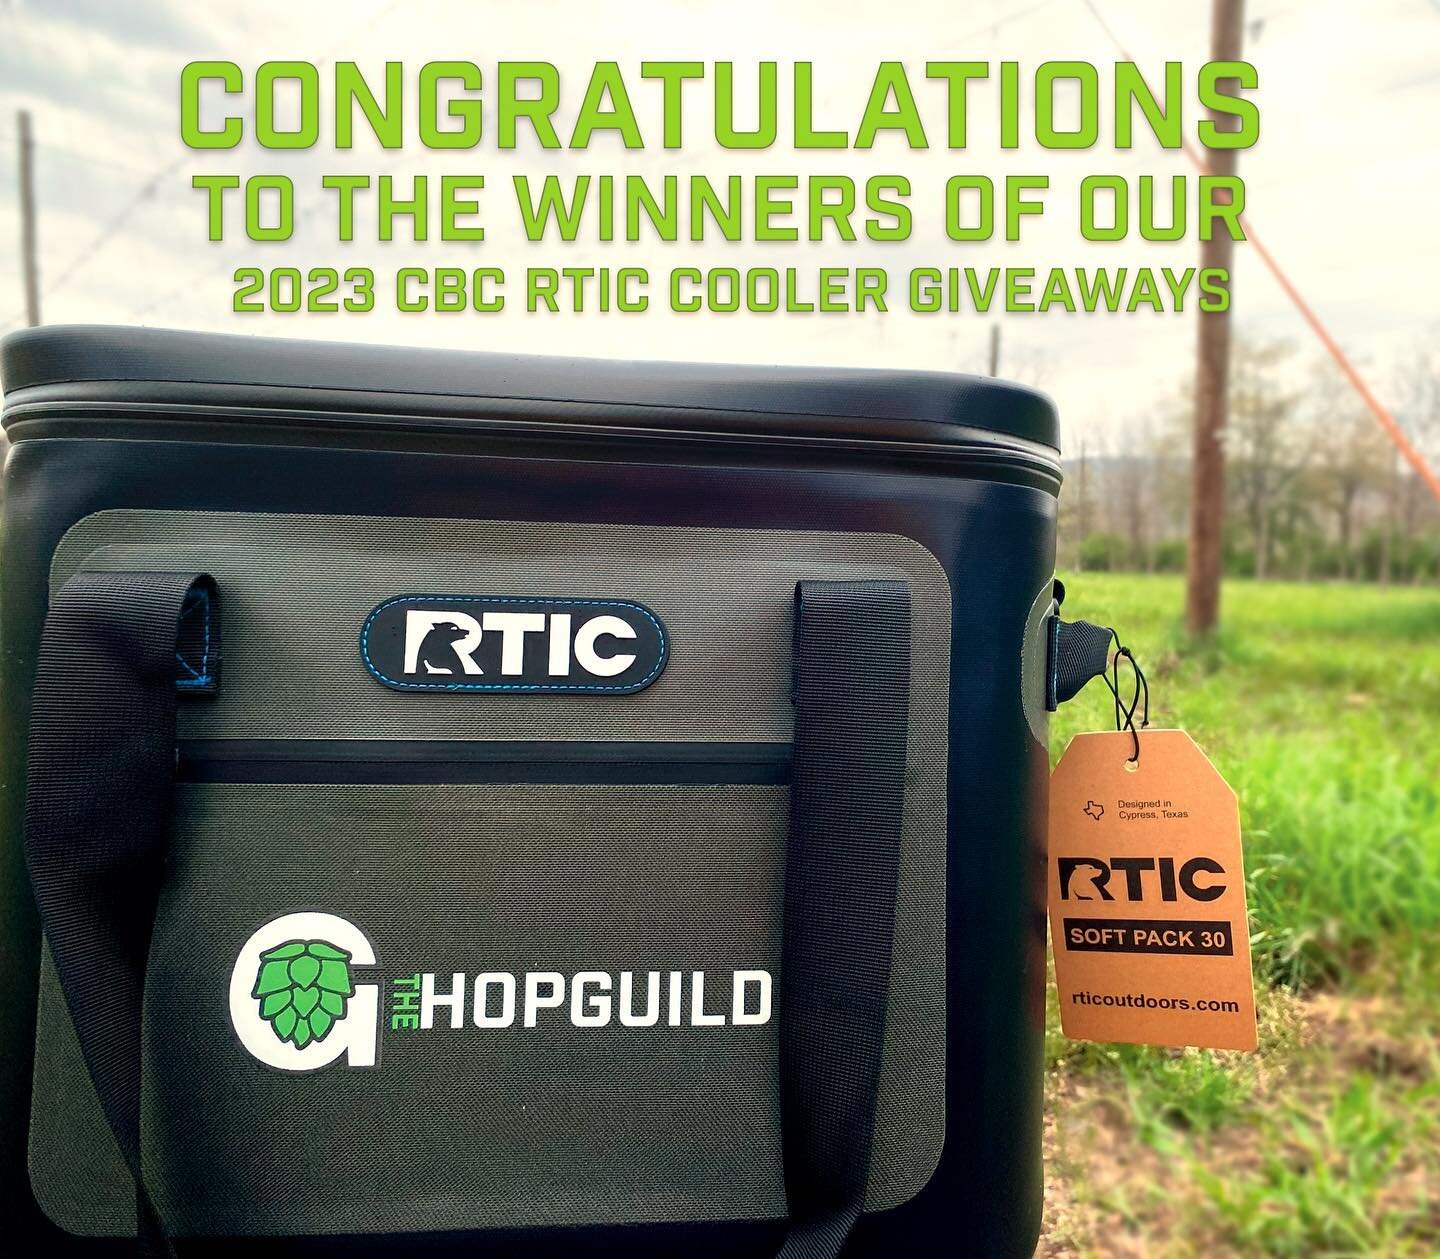 🚨ANNOUNCMENT!🚨 

Congratulations to the winners of the RTIC Cooler Giveaways that we hosted at the 2023 Craft Brewers Conference! These 30 can coolers will be perfect for keeping beers cold on the weekends! Branded with our logo, you&rsquo;ll alway